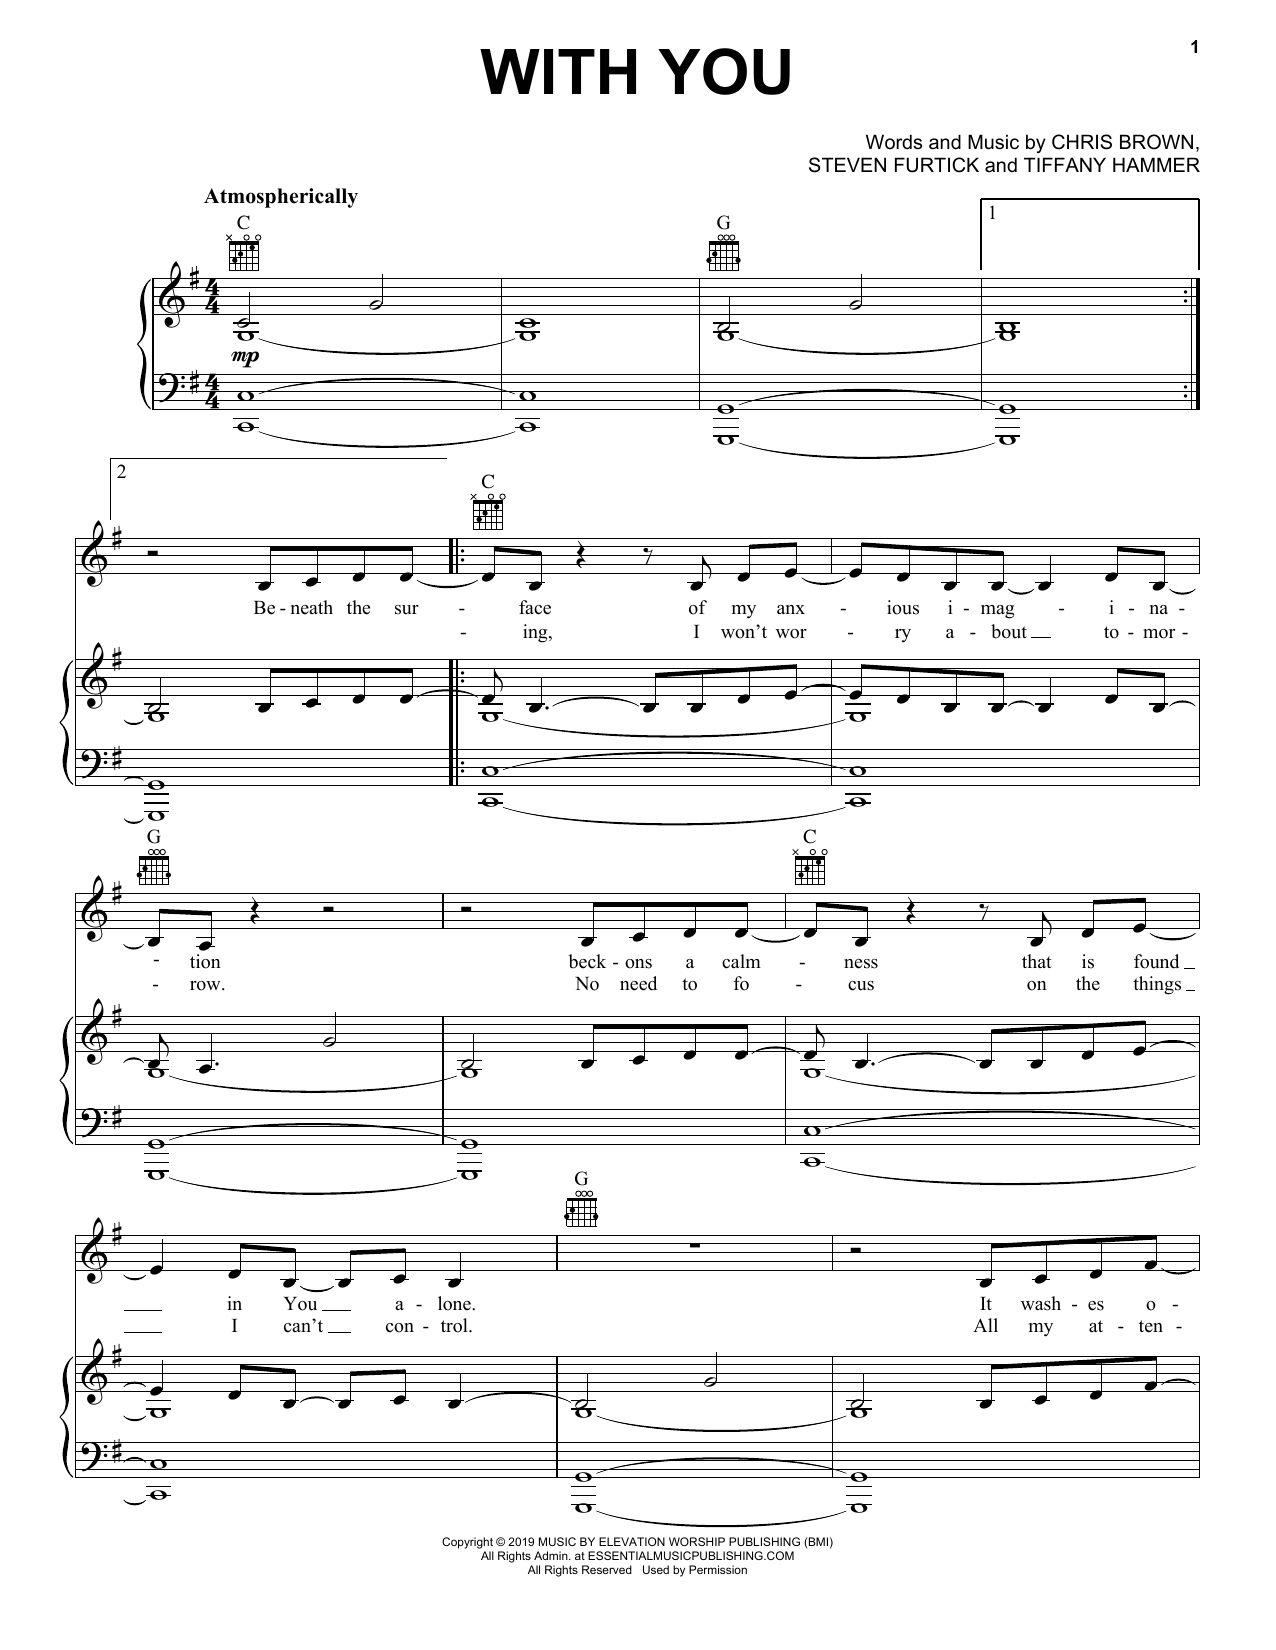 Download Elevation Worship With You Sheet Music